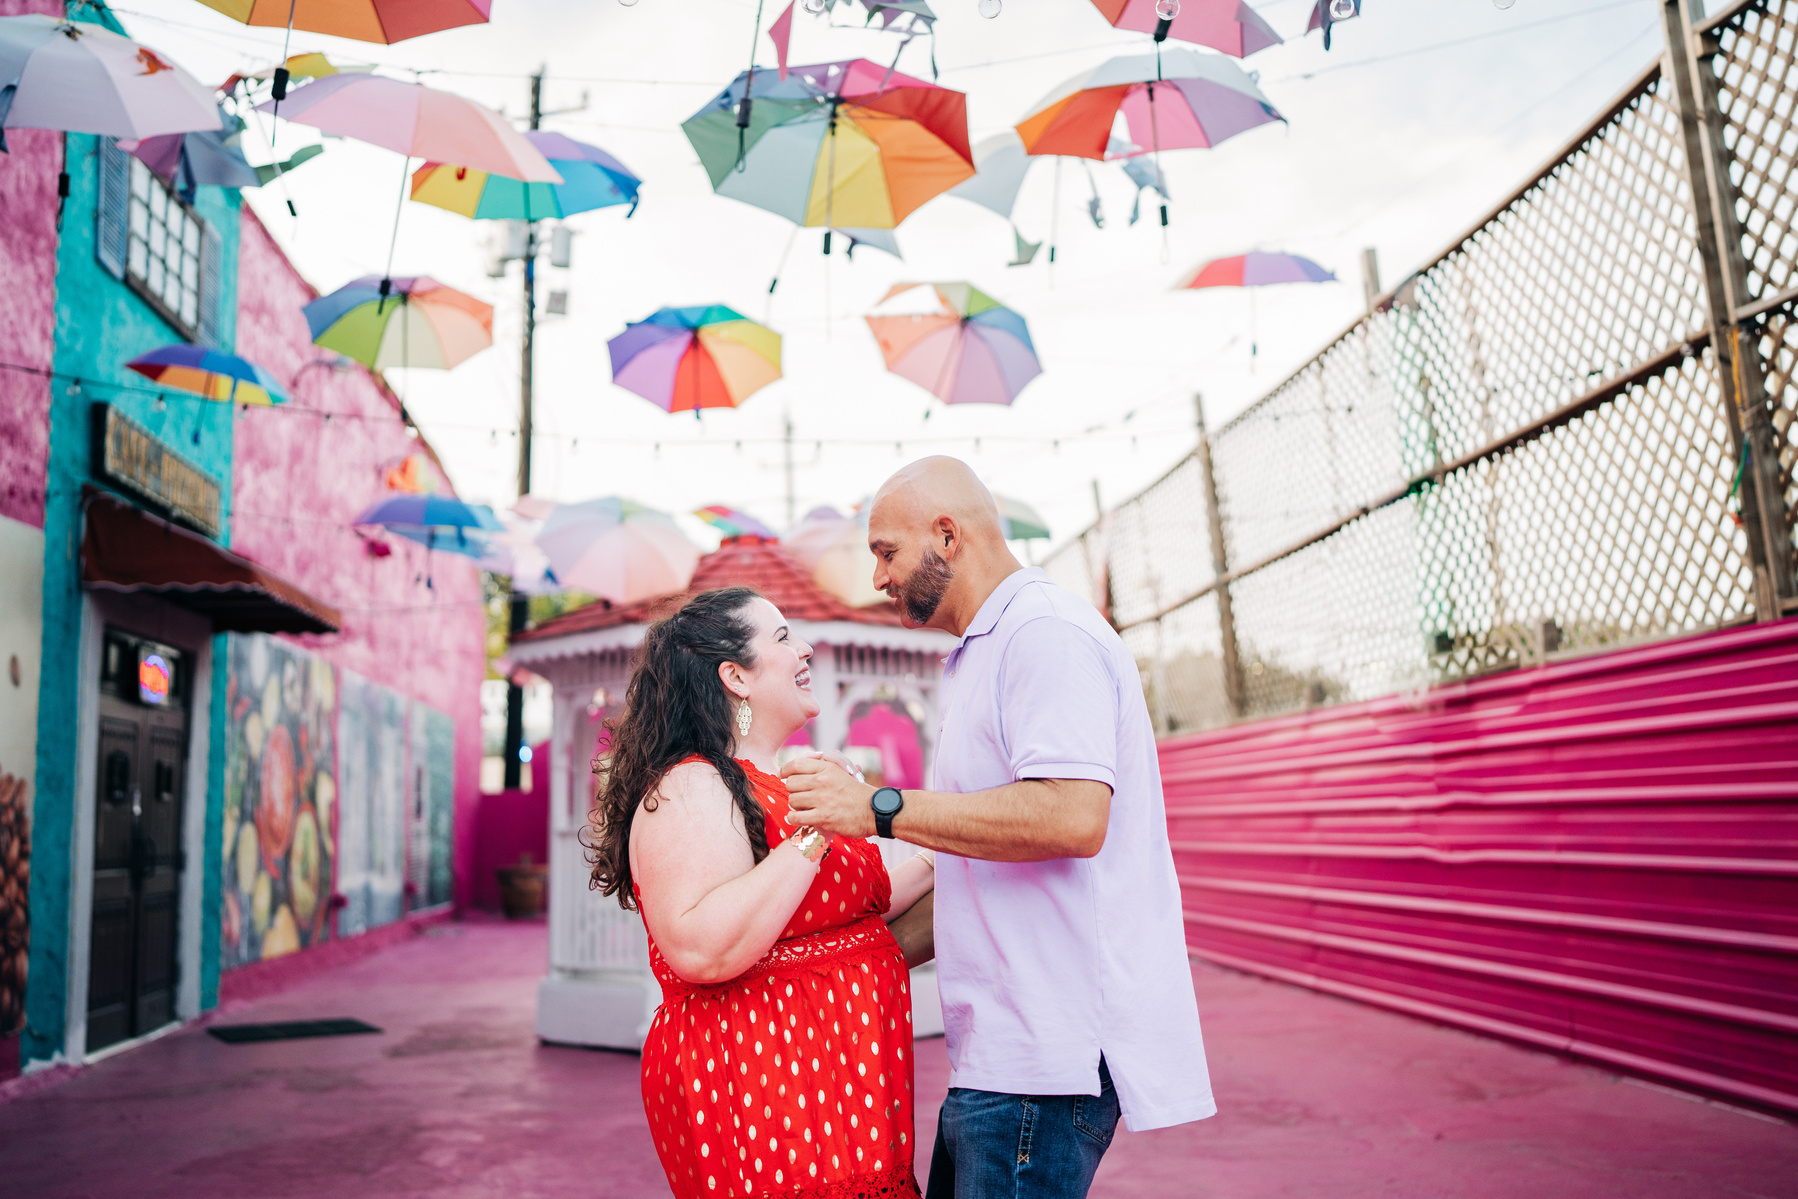 A newly engaged couple dancing under colorful umbrellas.